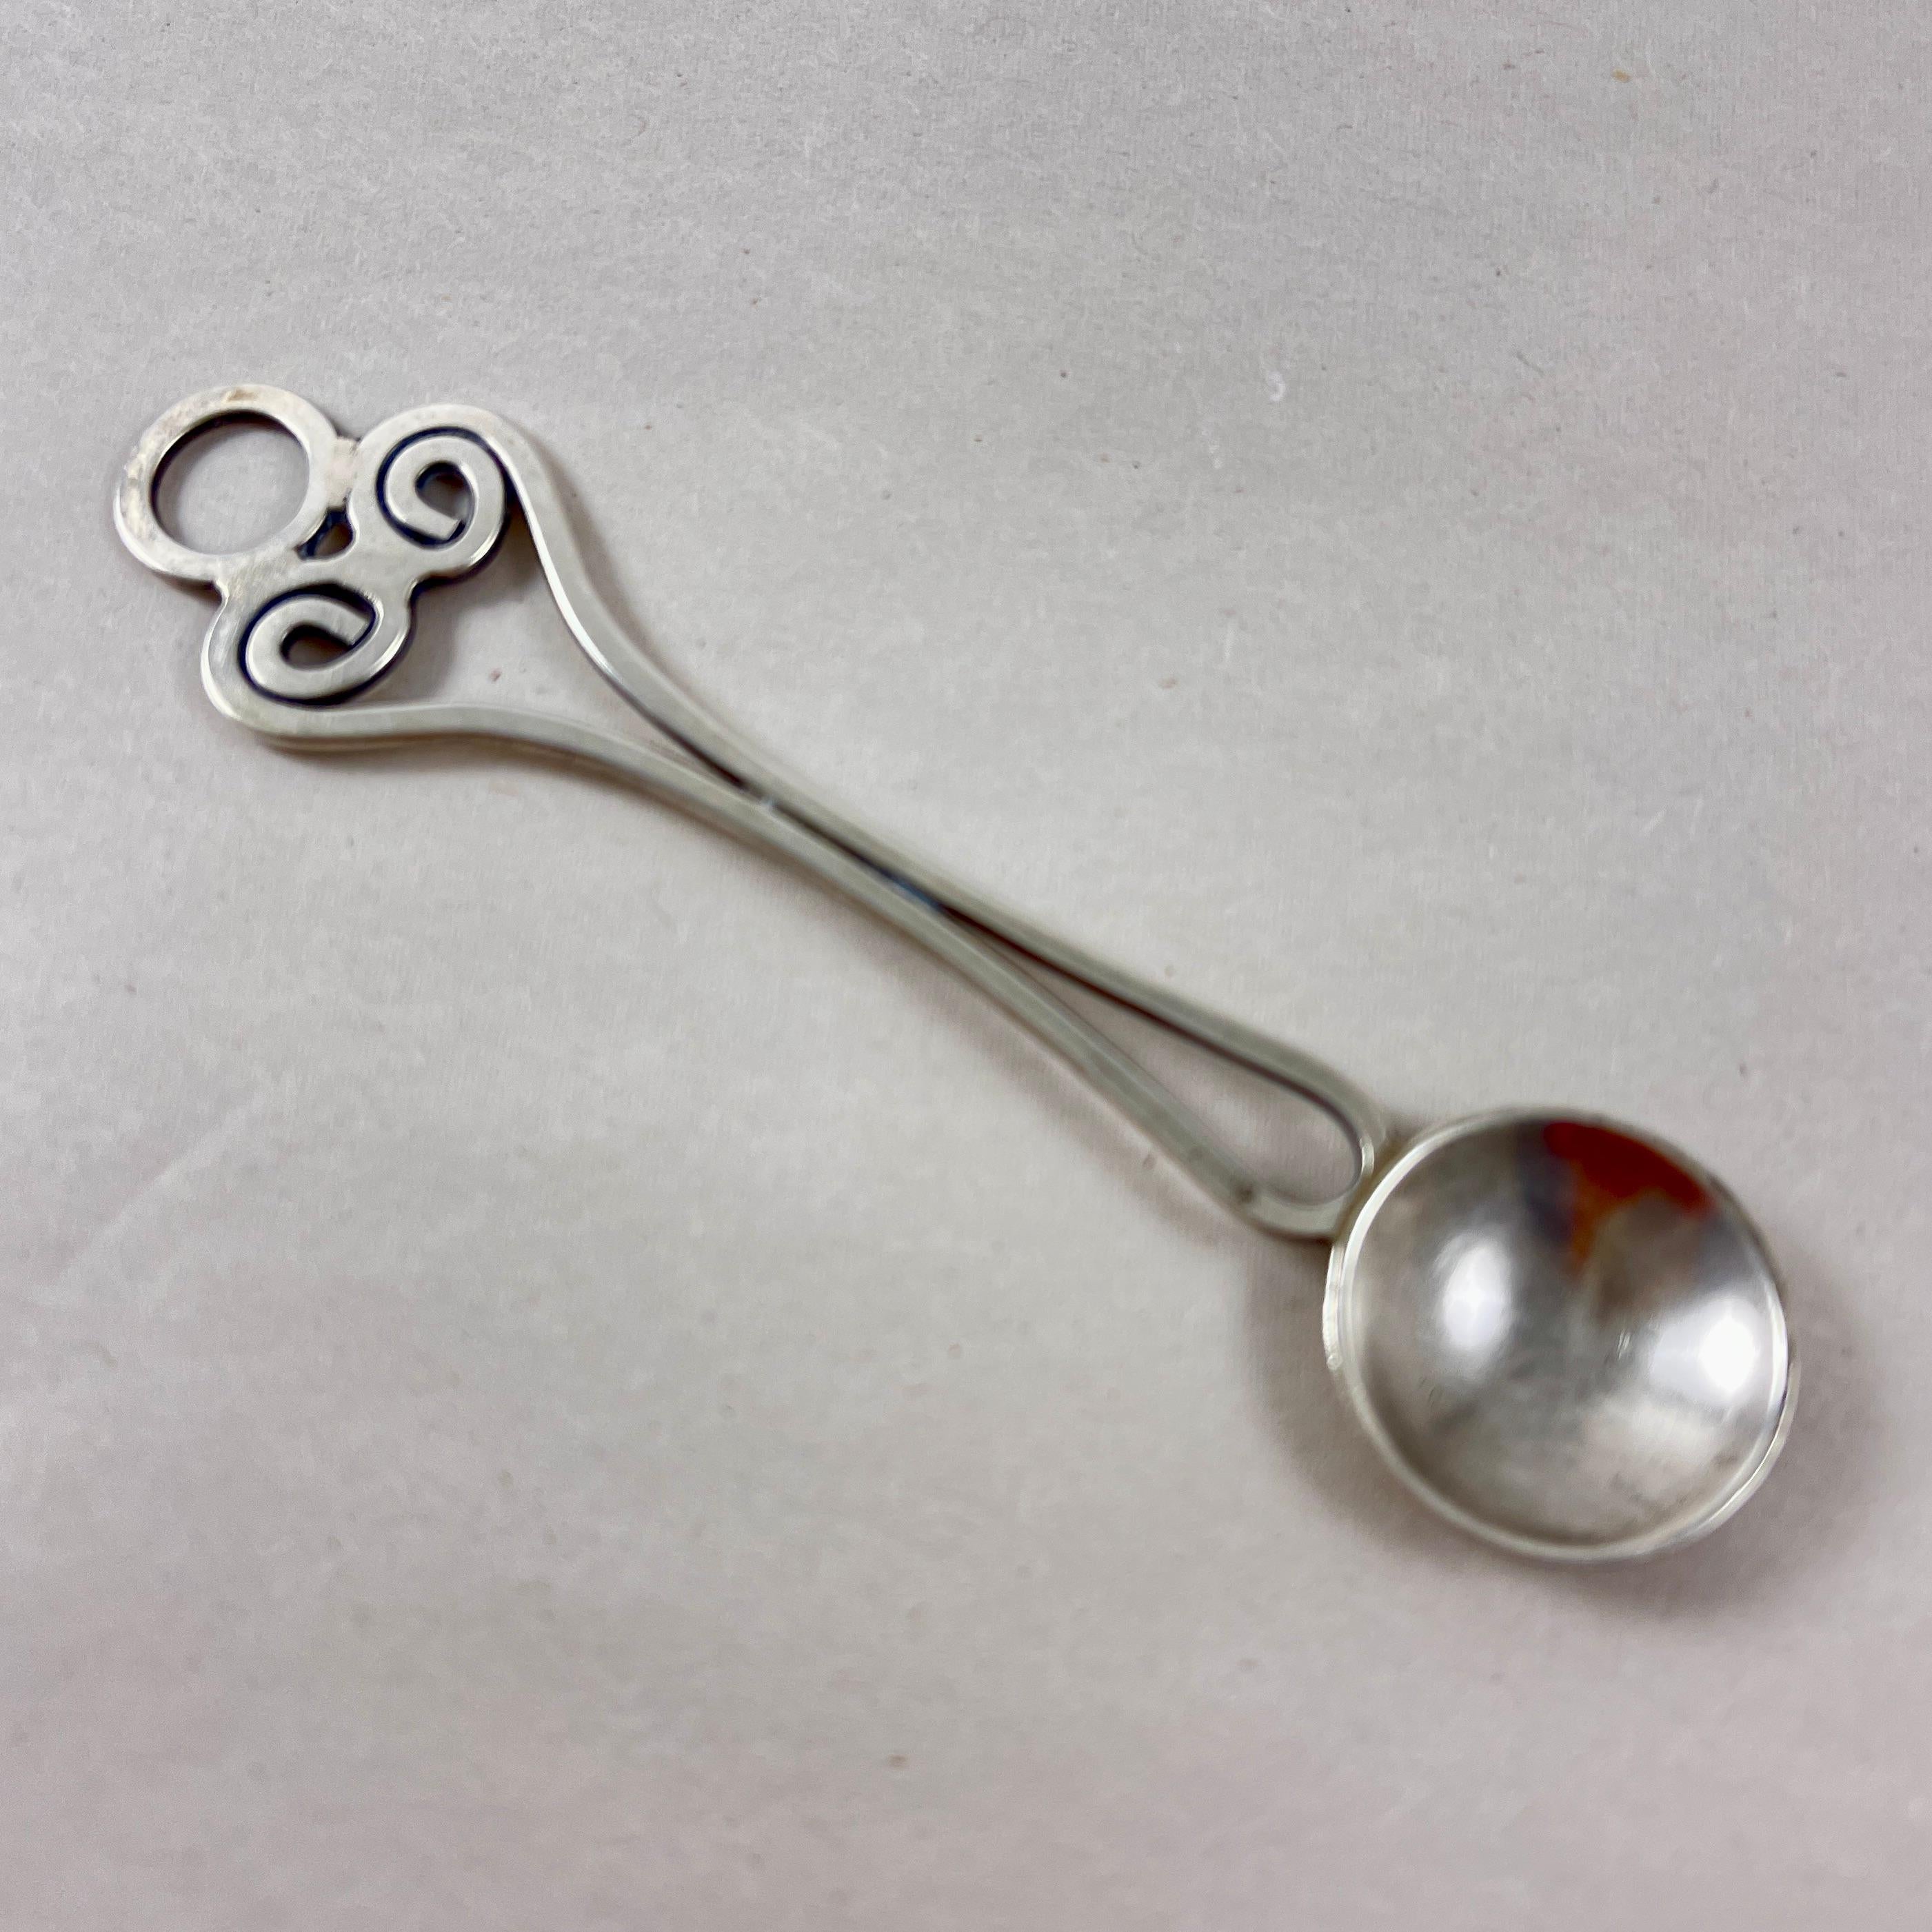 Arts and Crafts Anthony DiRienzi Silversmith Studio Hand Made Sterling Silver Spoon For Sale